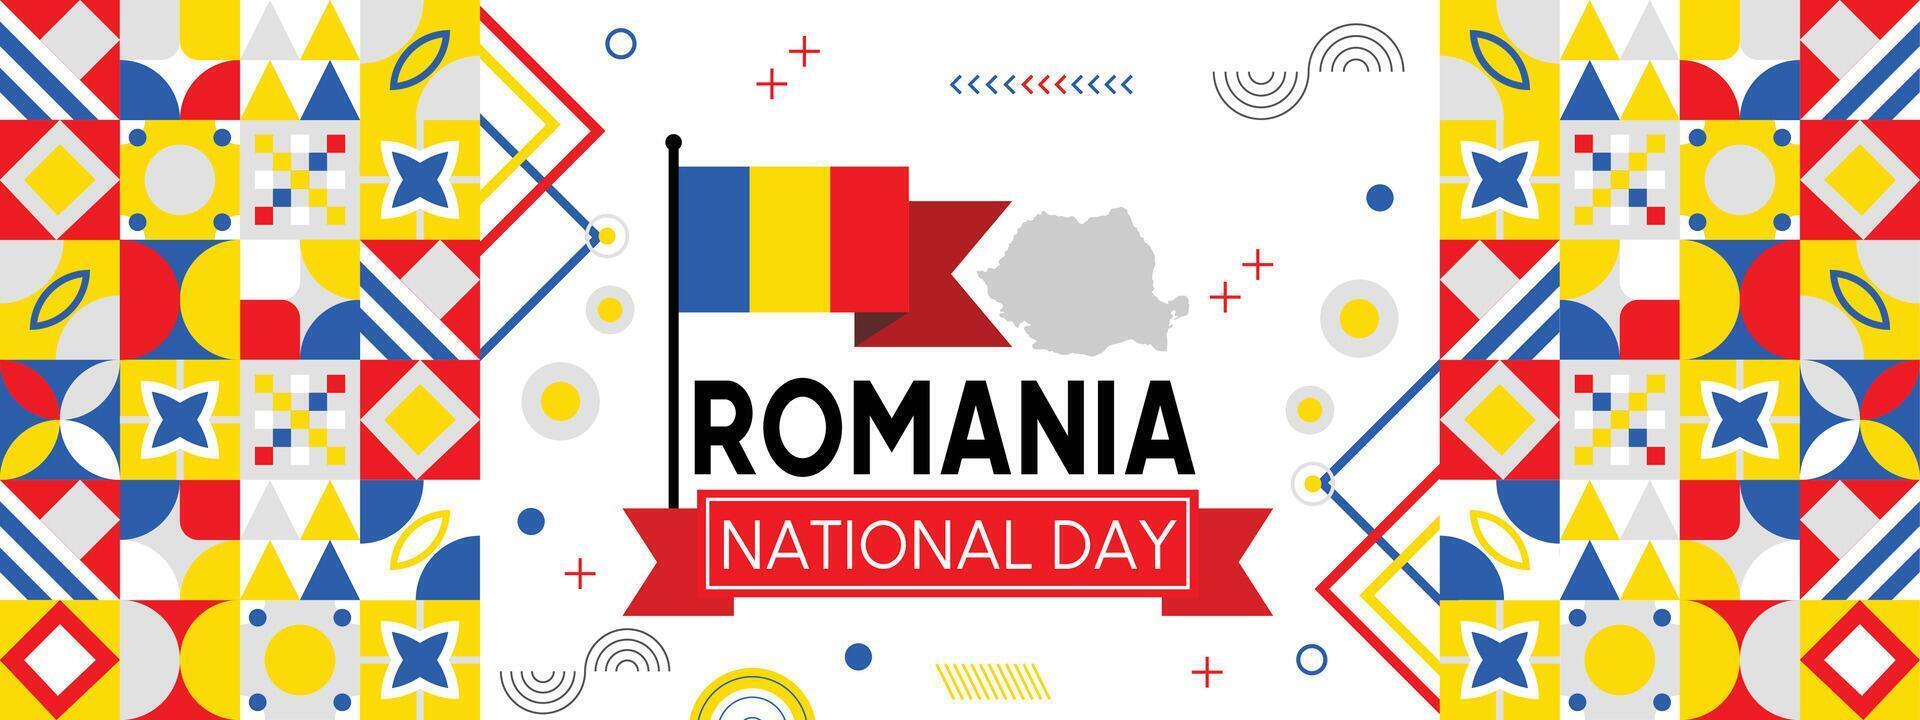 Romania national day banner with Romanian flag colors theme background and geometric abstract retro modern blue yellow red design. vector